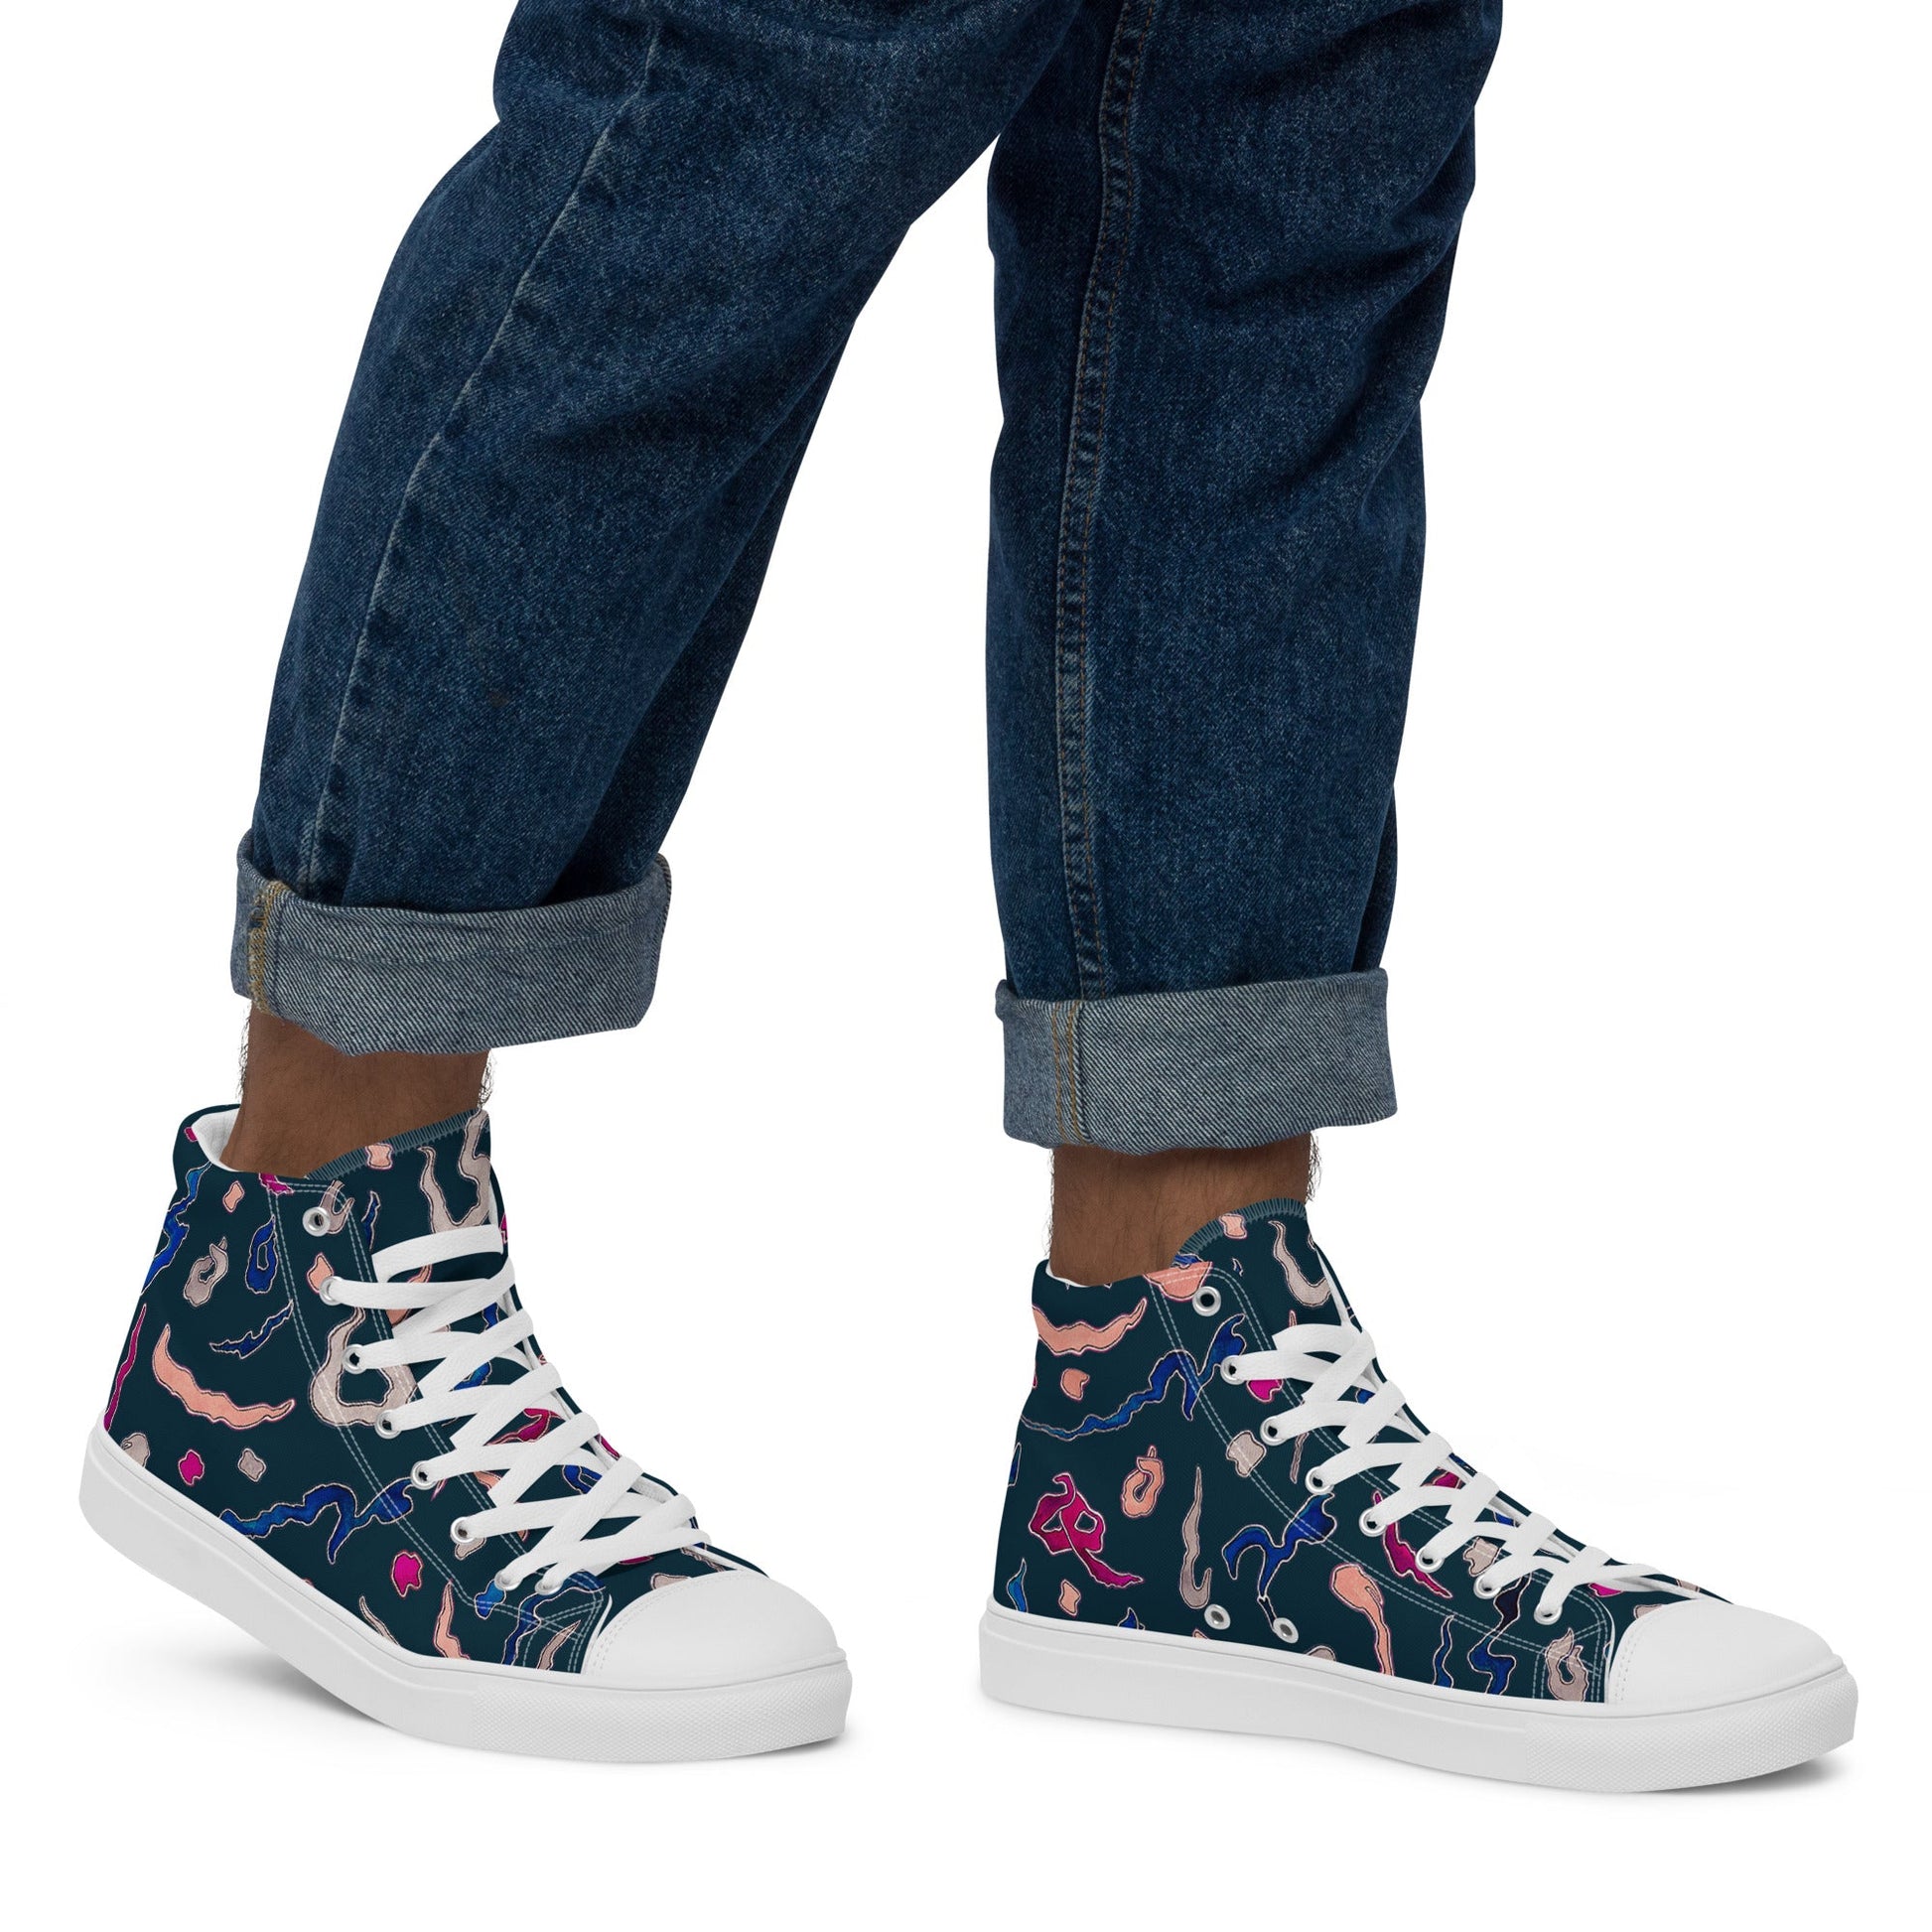 KINDNESS Men’s High Top Canvas Shoes - BONOTEE